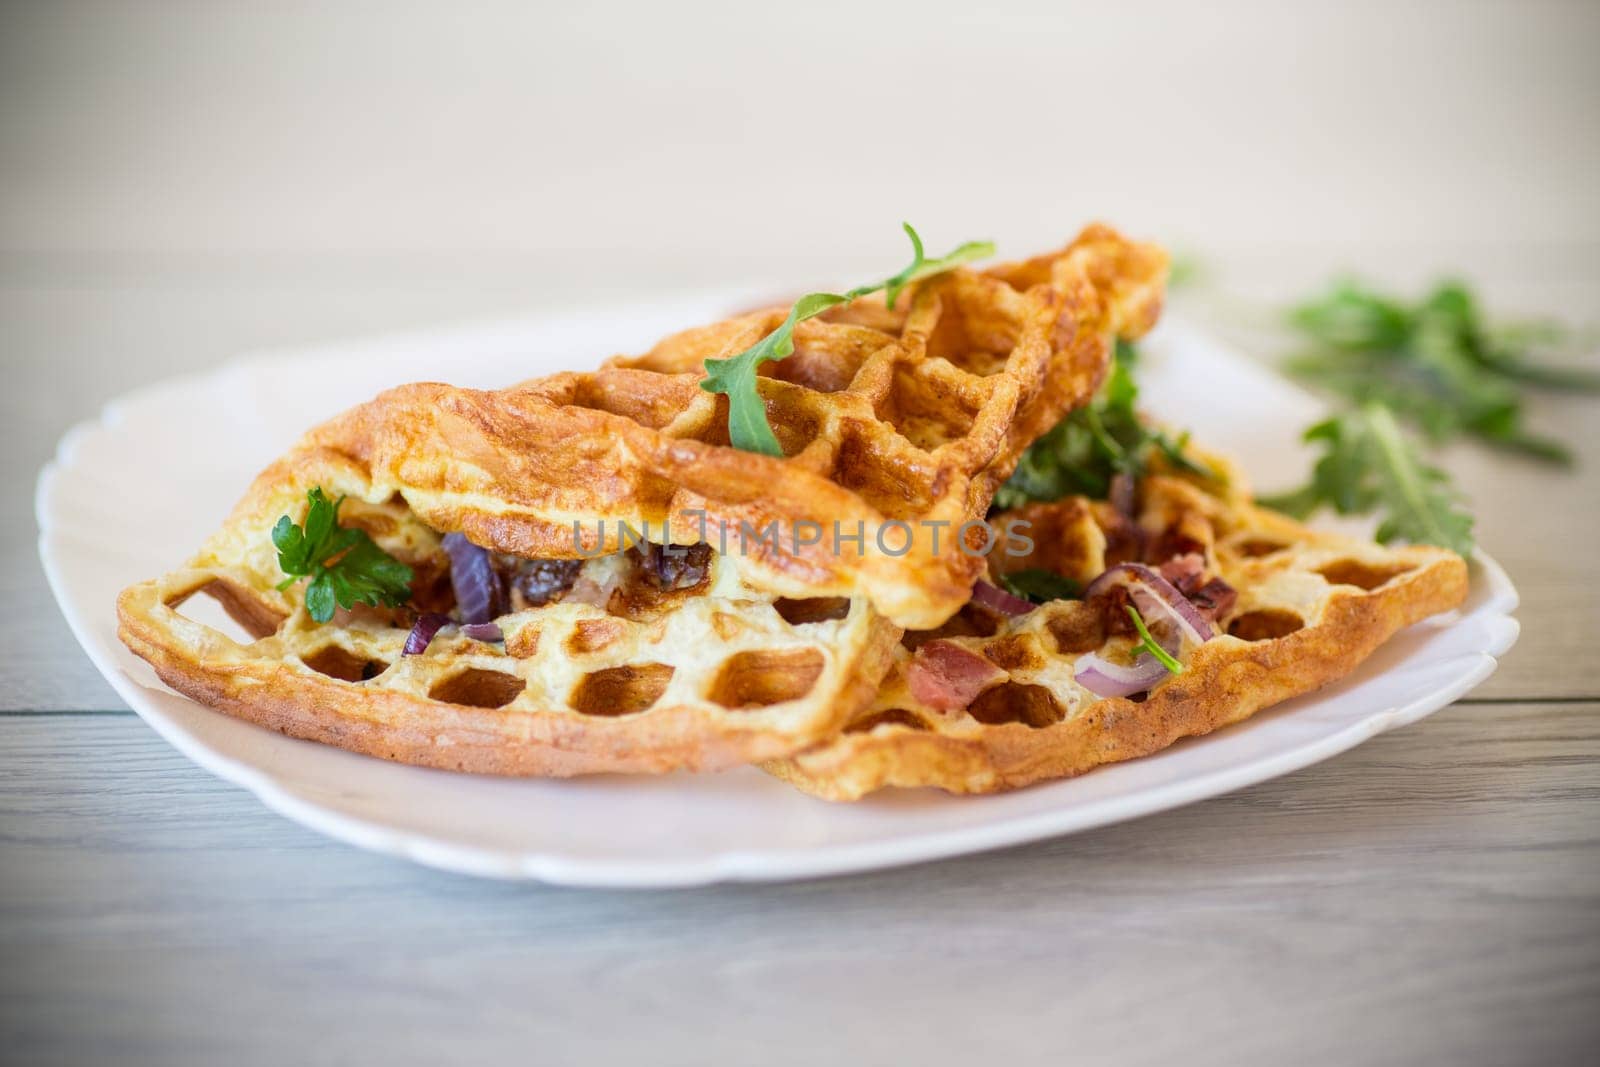 Egg omelette stuffed with onions and herbs, fried in the form of waffles by Rawlik